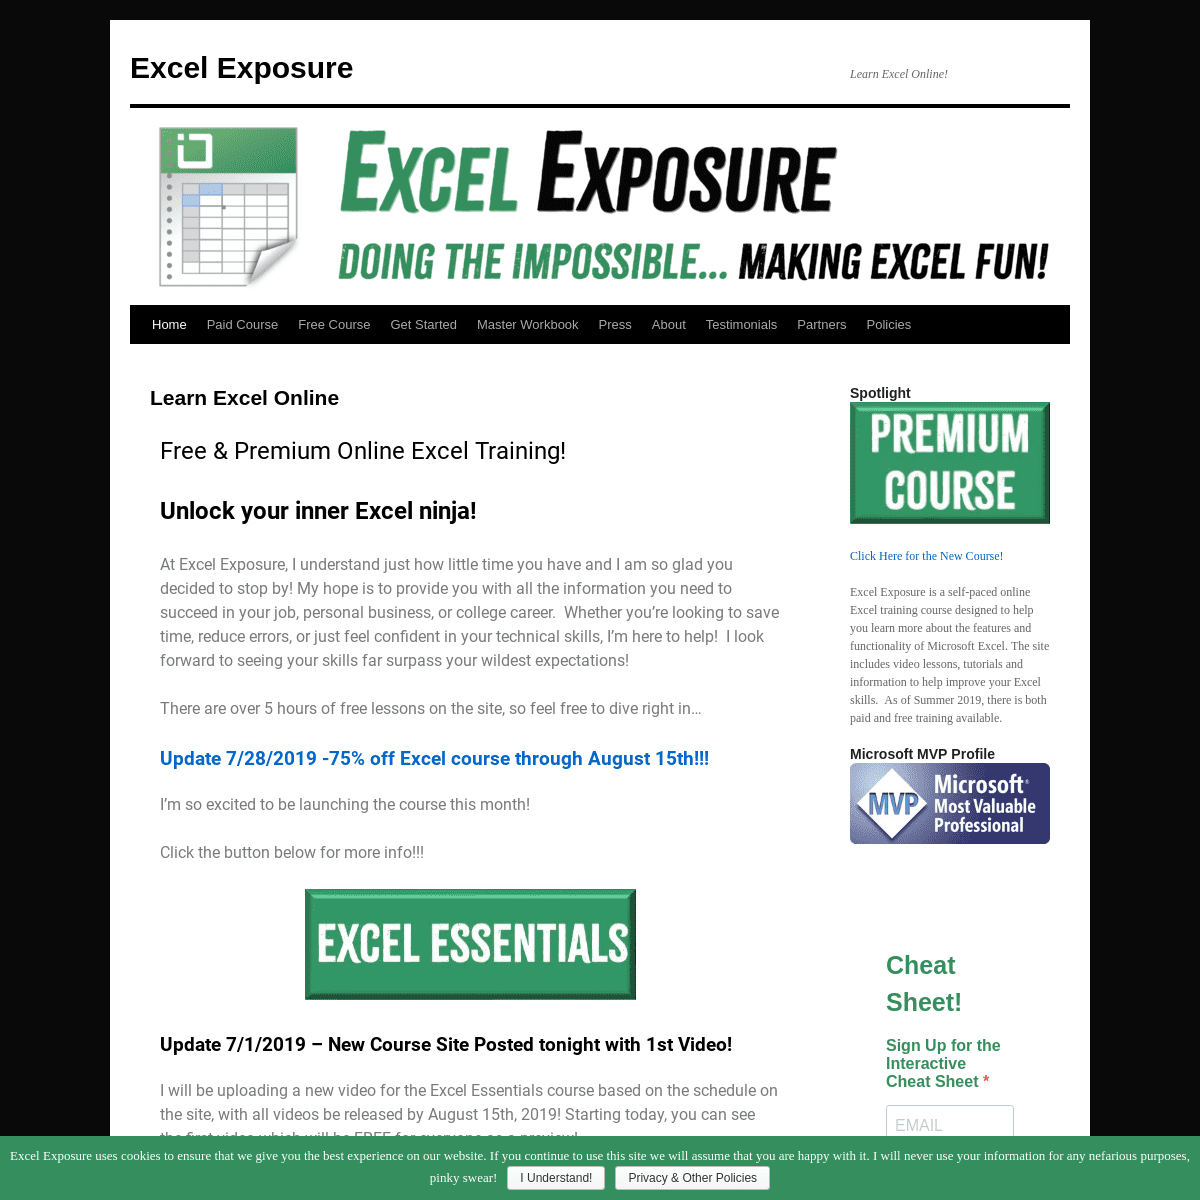 A complete backup of excelexposure.com